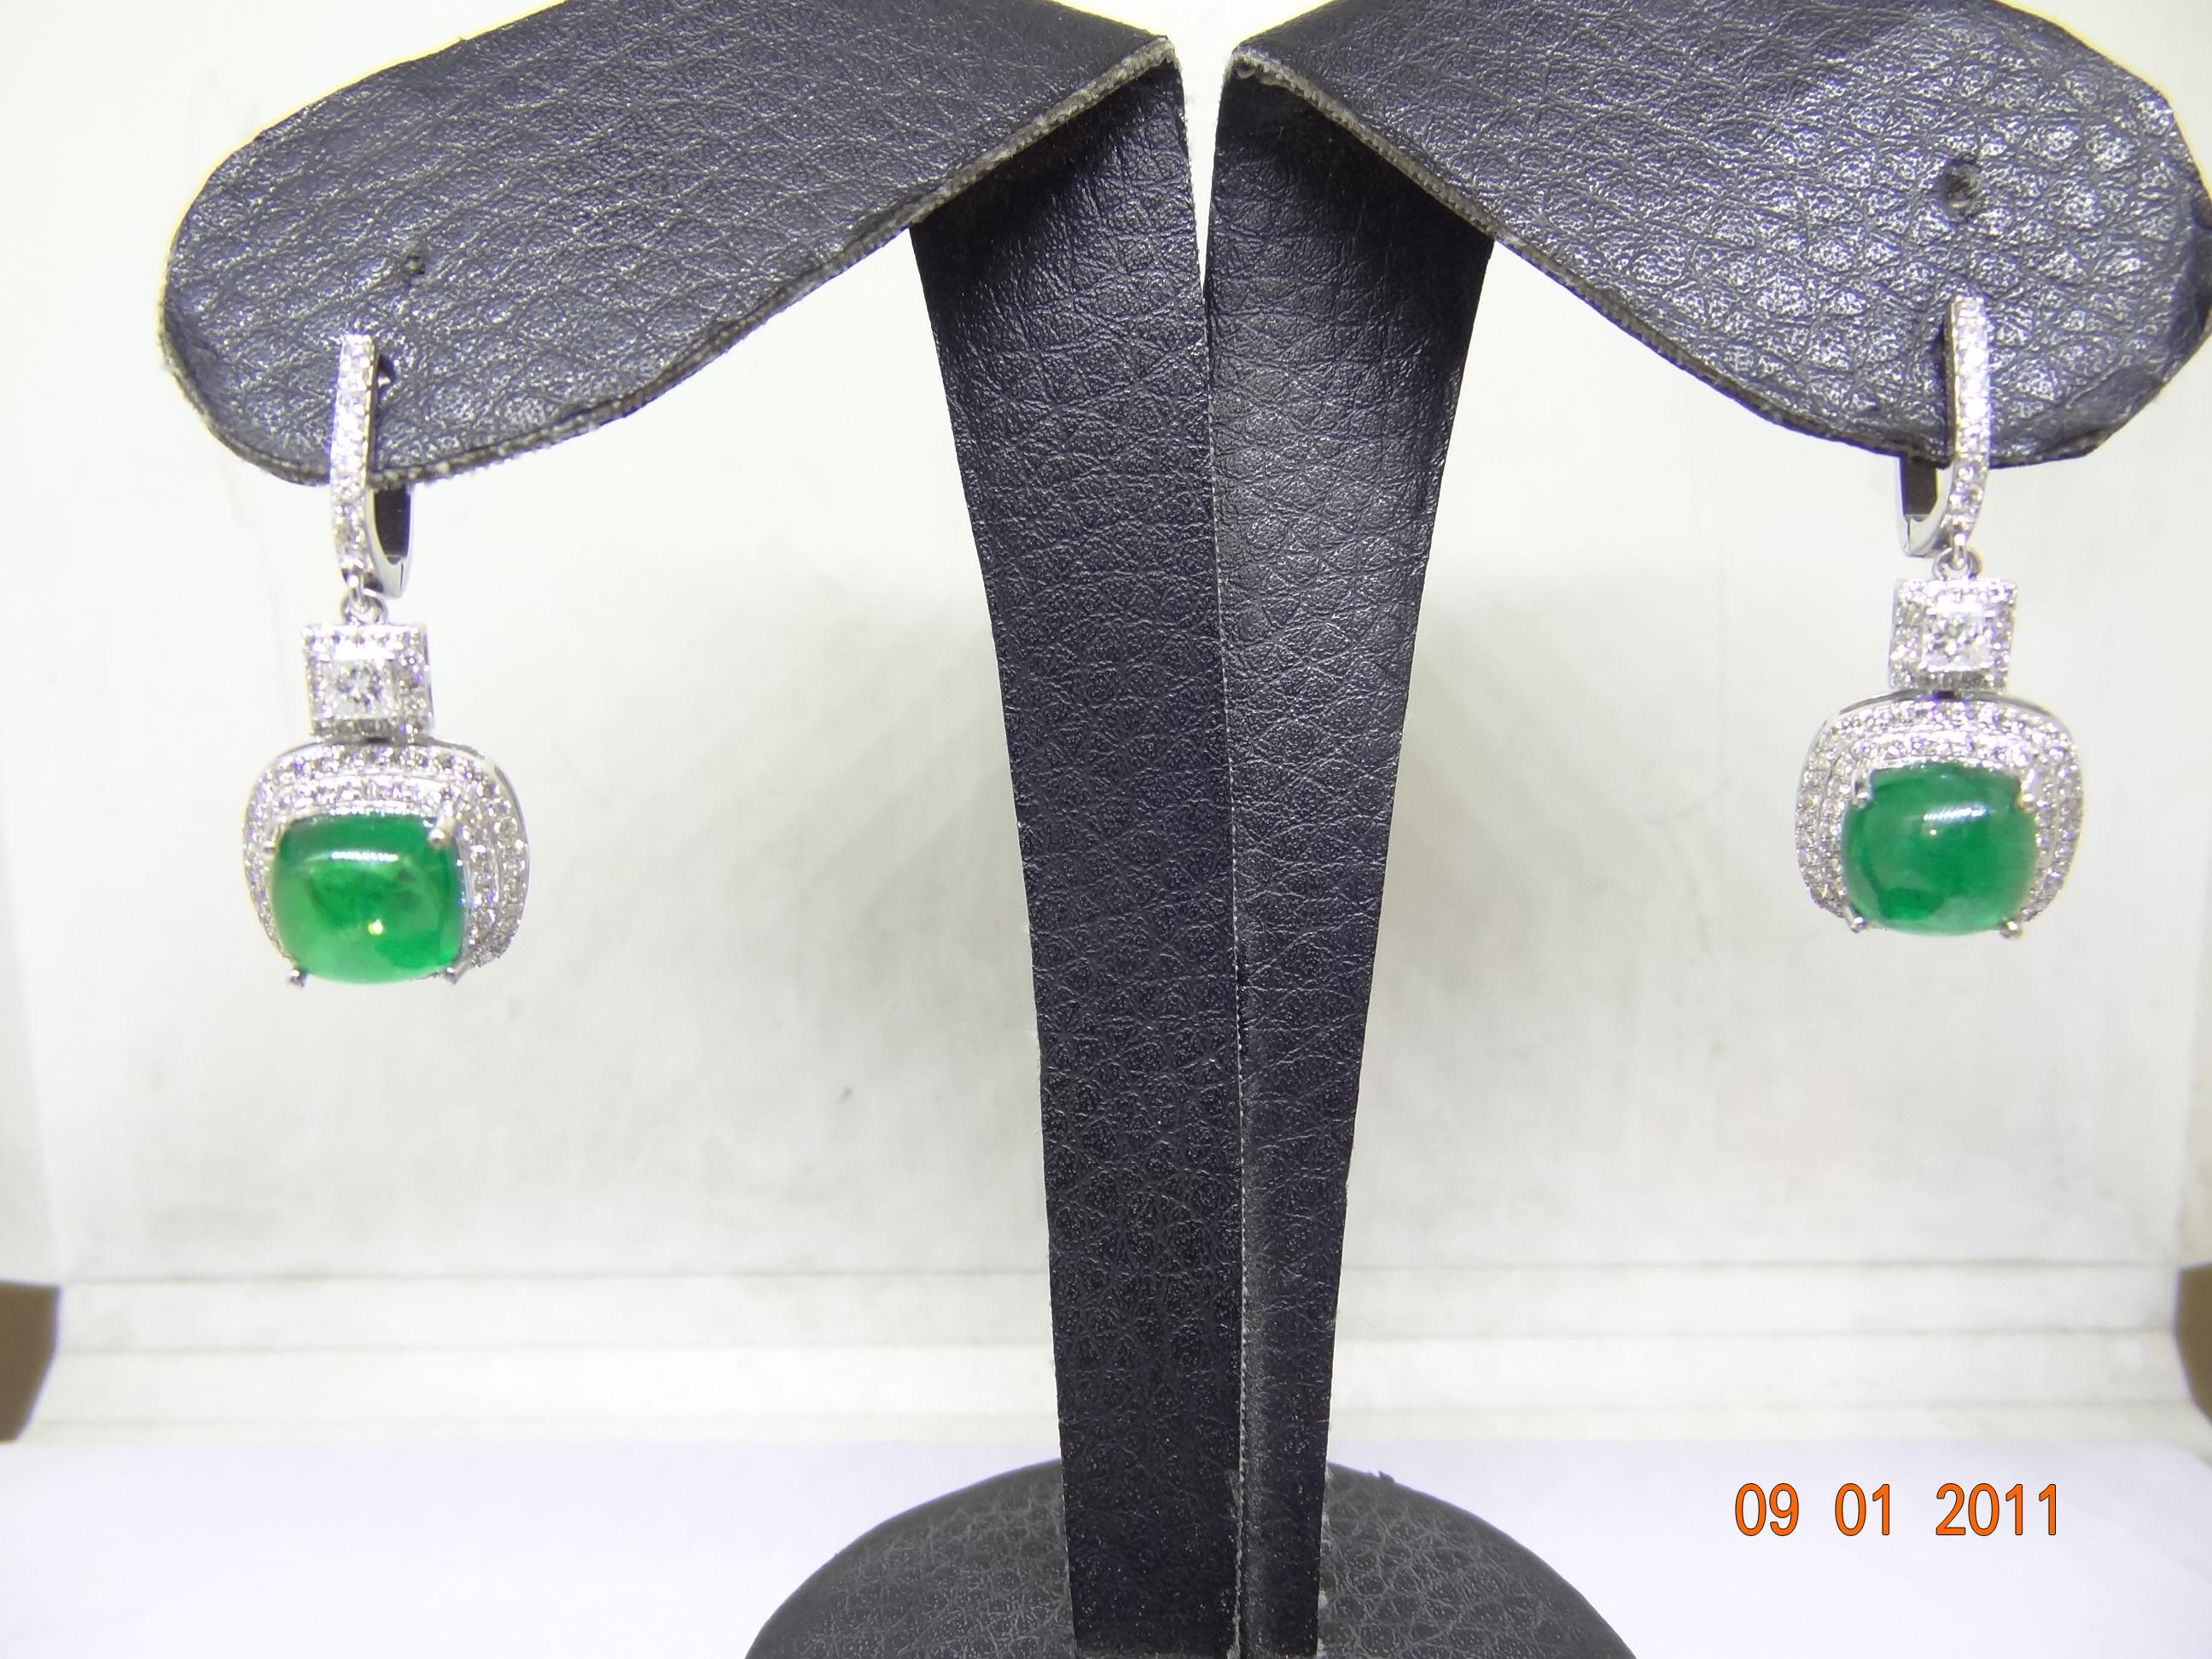 This is a natural Zambian Emerald earring with diamonds and 14k gold. The emeralds are very high quality and very good quality diamonds the clarity is vsi and G colour


Emeralds : 8.42 carats
diamonds : 1.54 carats
gold : 6.11 gm

This is a brand